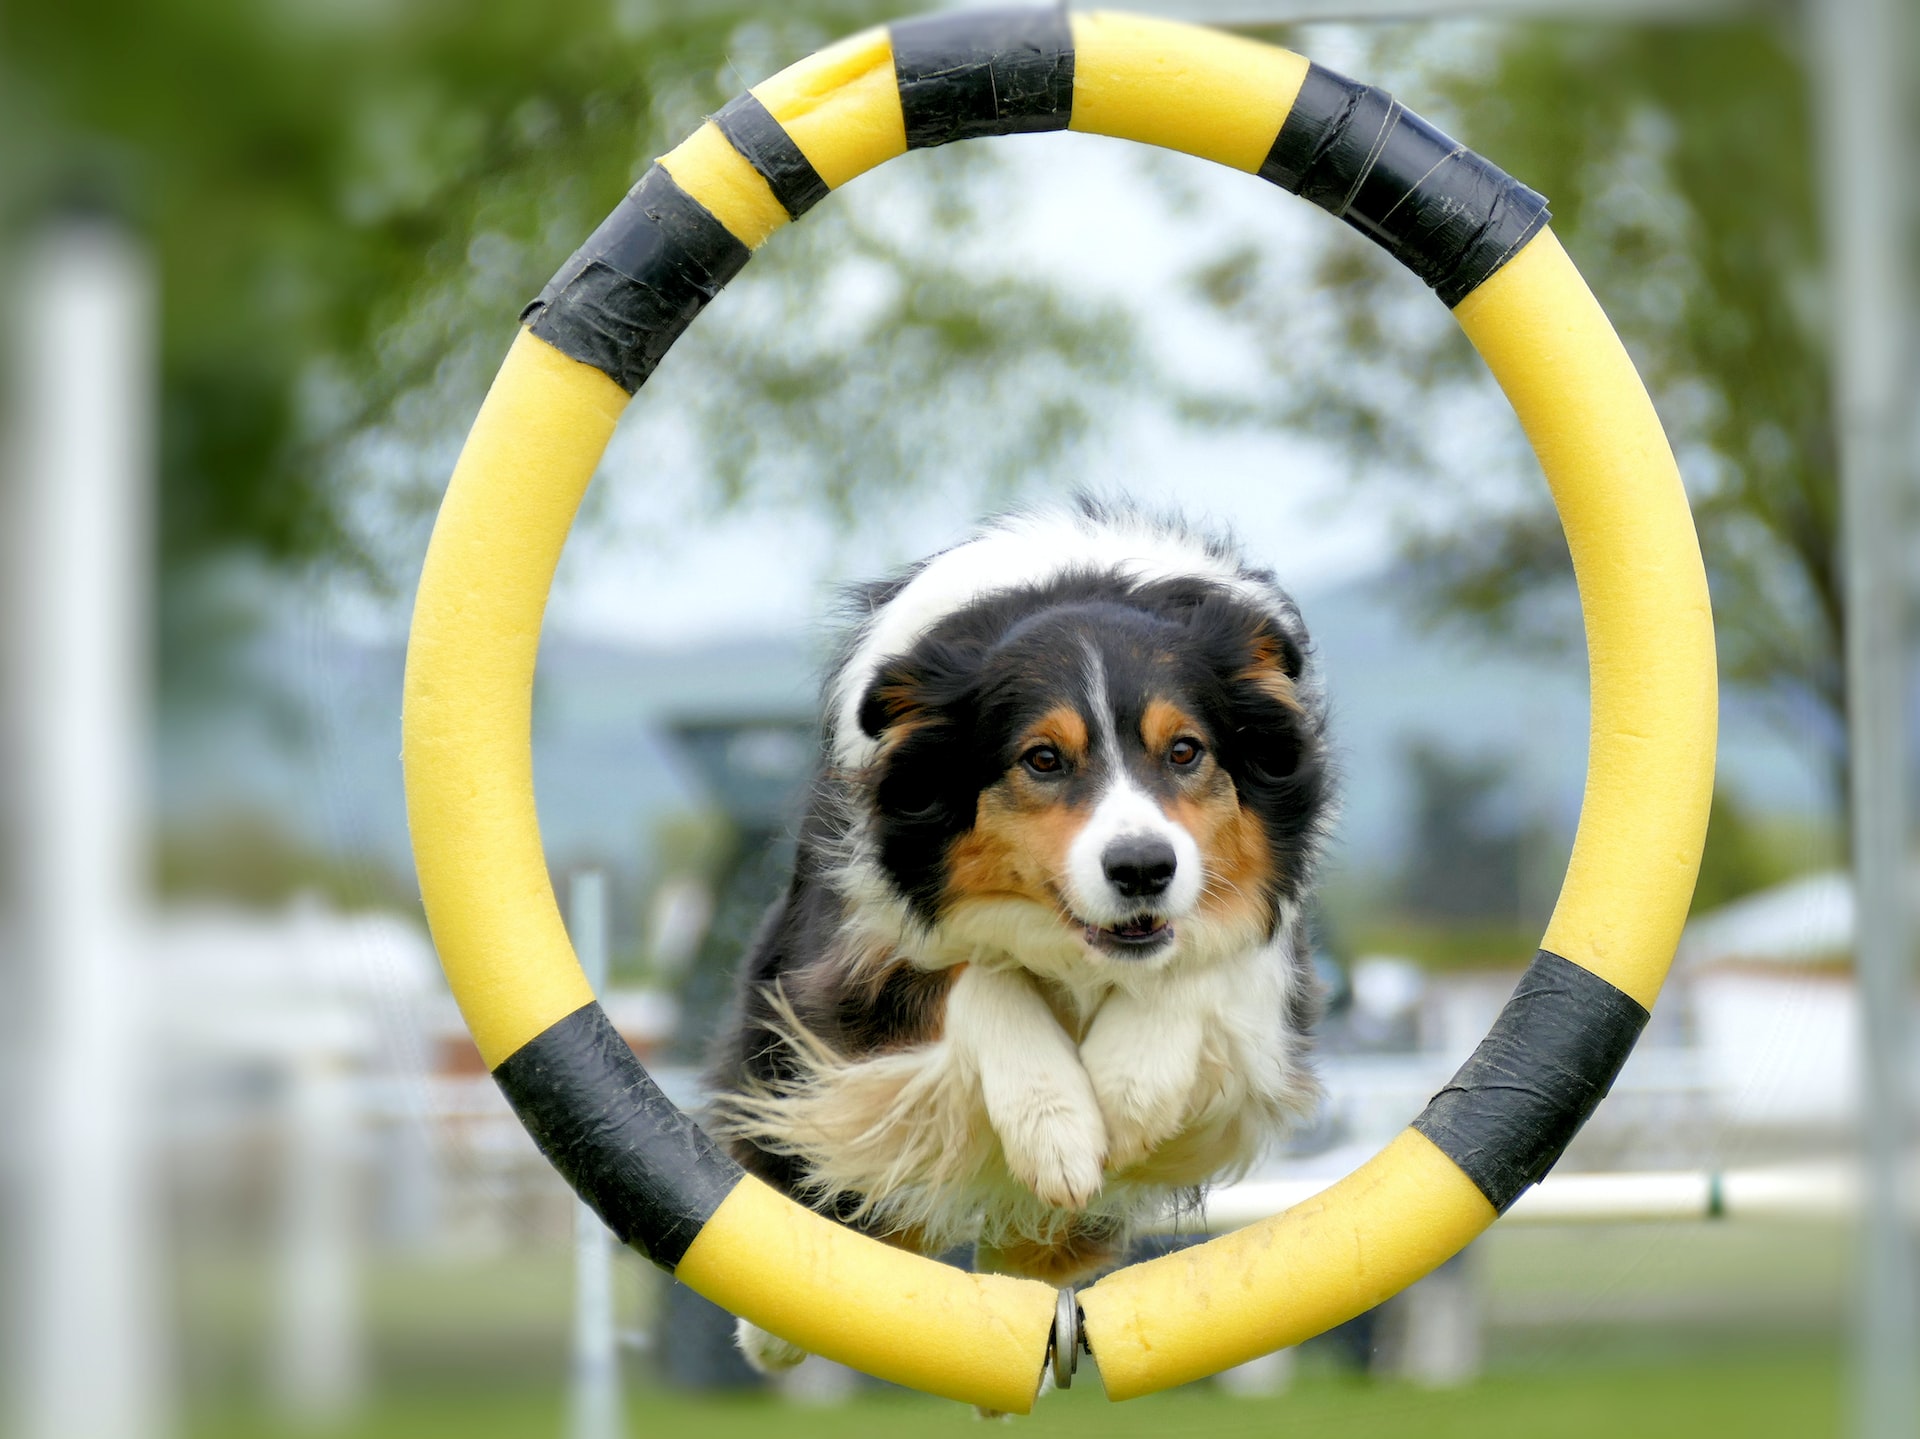 Exercising at the boarding kennel. Image by Andrea Lightfoot from Unsplash.